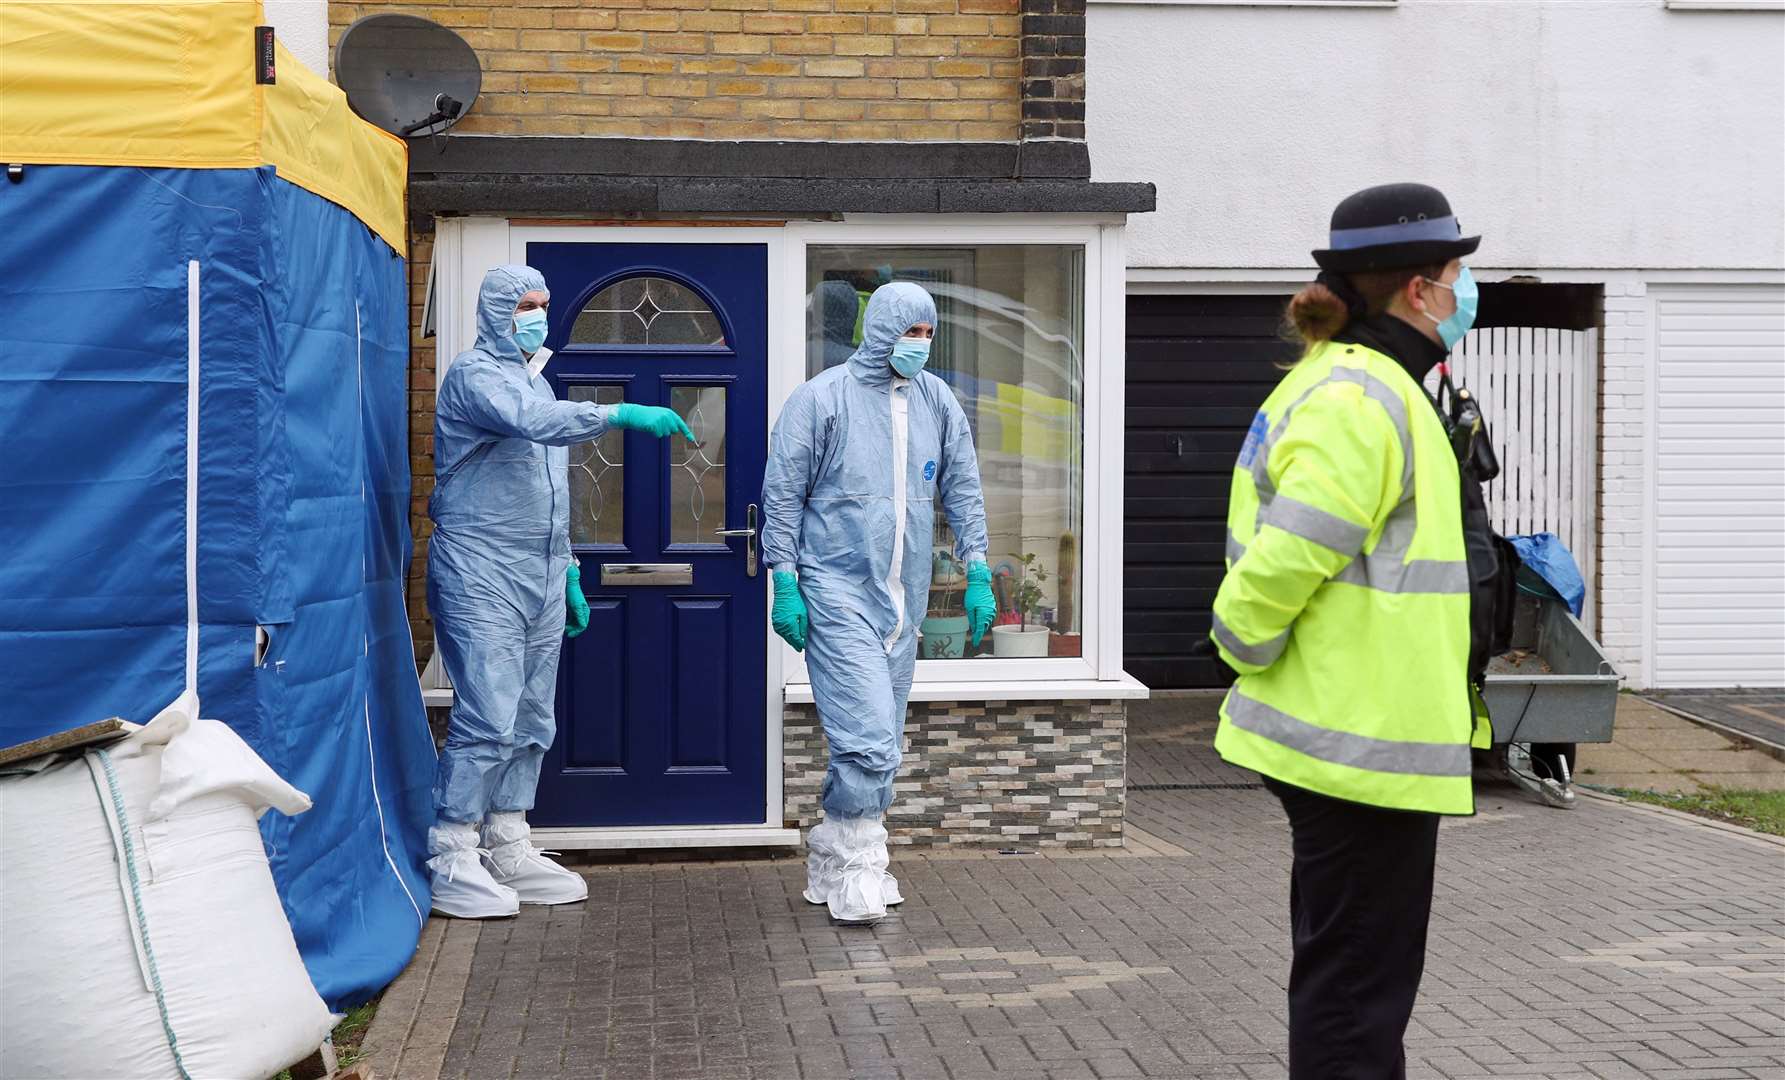 Forensic officers outside a house in Freemens Way in Deal, Kent (Steve Parsons/PA)